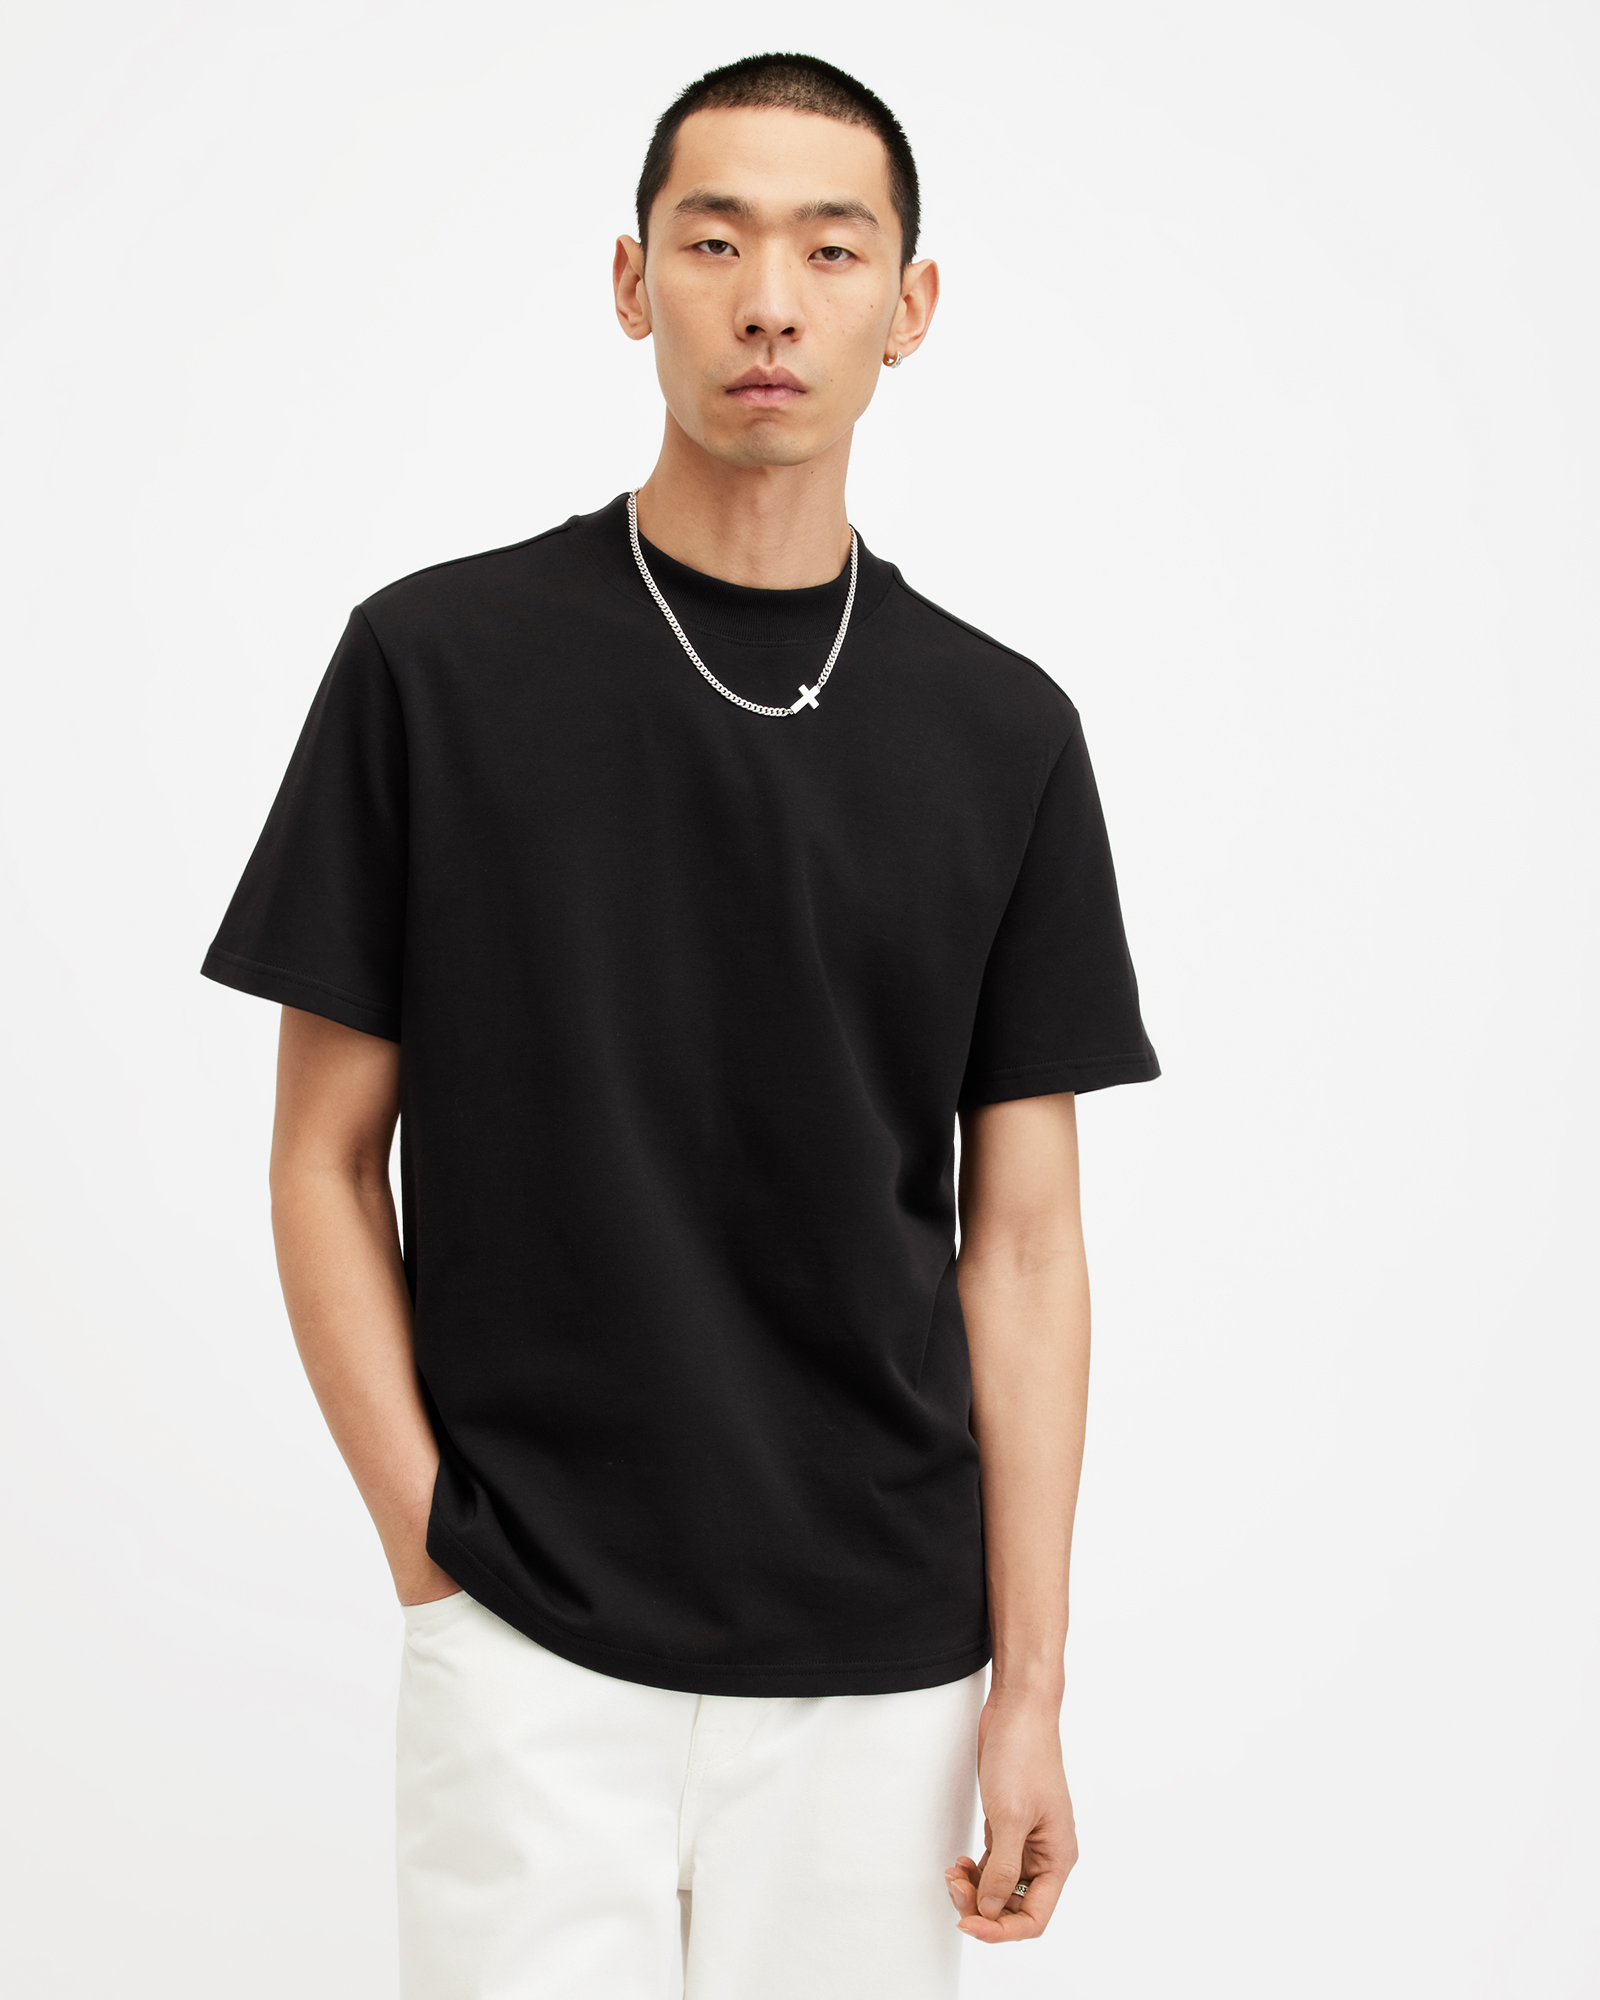 AllSaints Nero Heavyweight Relaxed Fit T-Shirt,, Jet Black